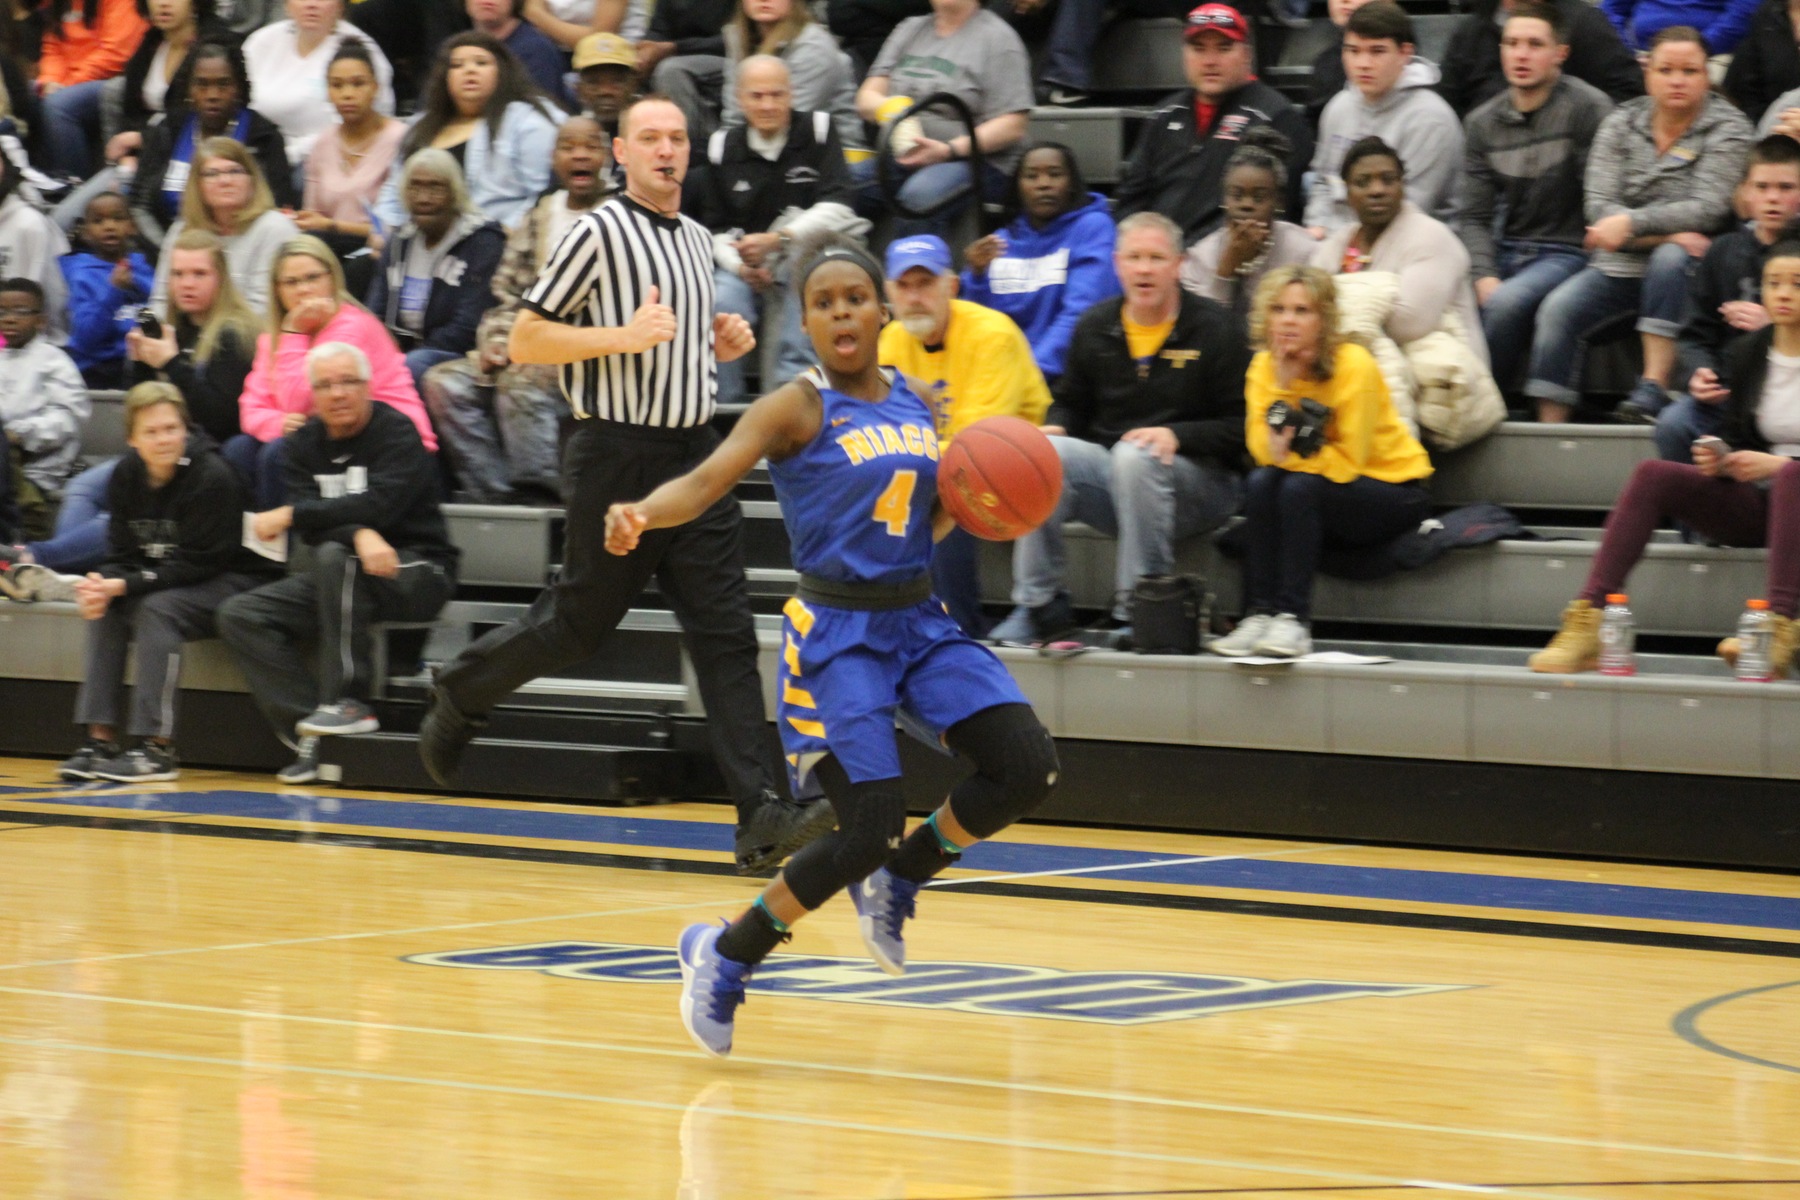 NIACC's UU Longs brings the ball up the court during the second half of Saturday's regional title game against Kirkwood in Cedar Rapids.